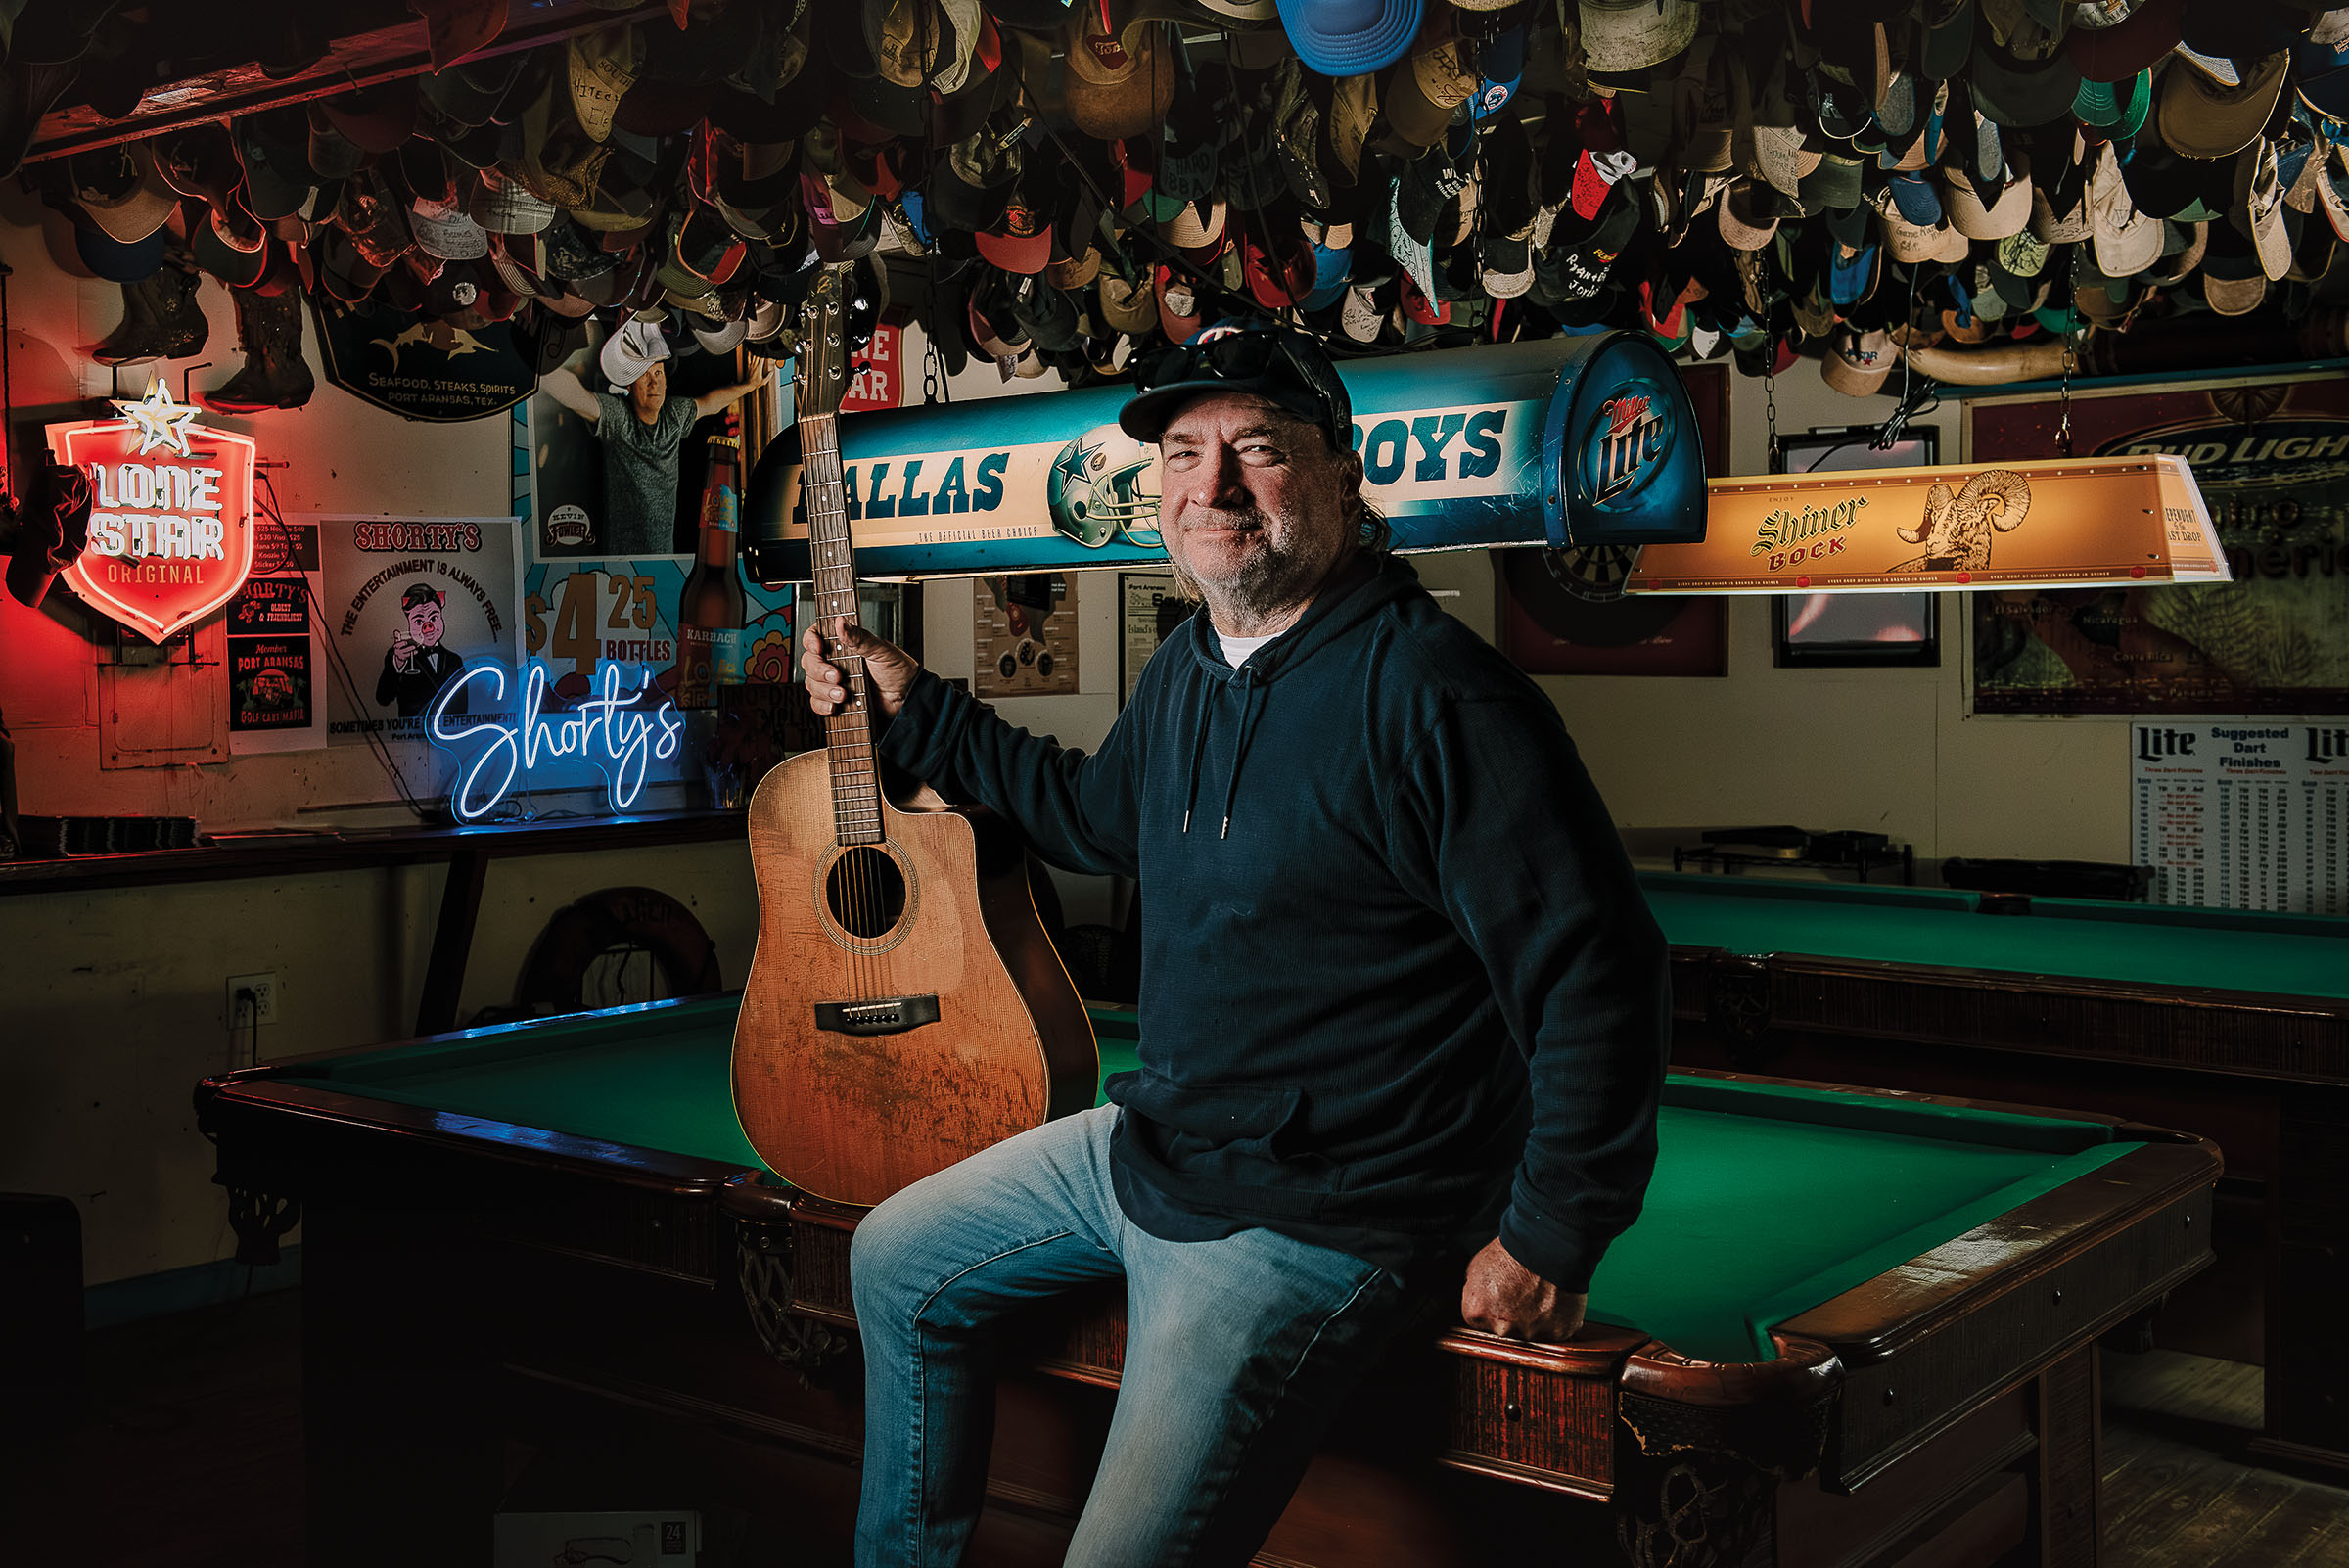 A man with a guitar leans on a pool table in a dimly-lit bar